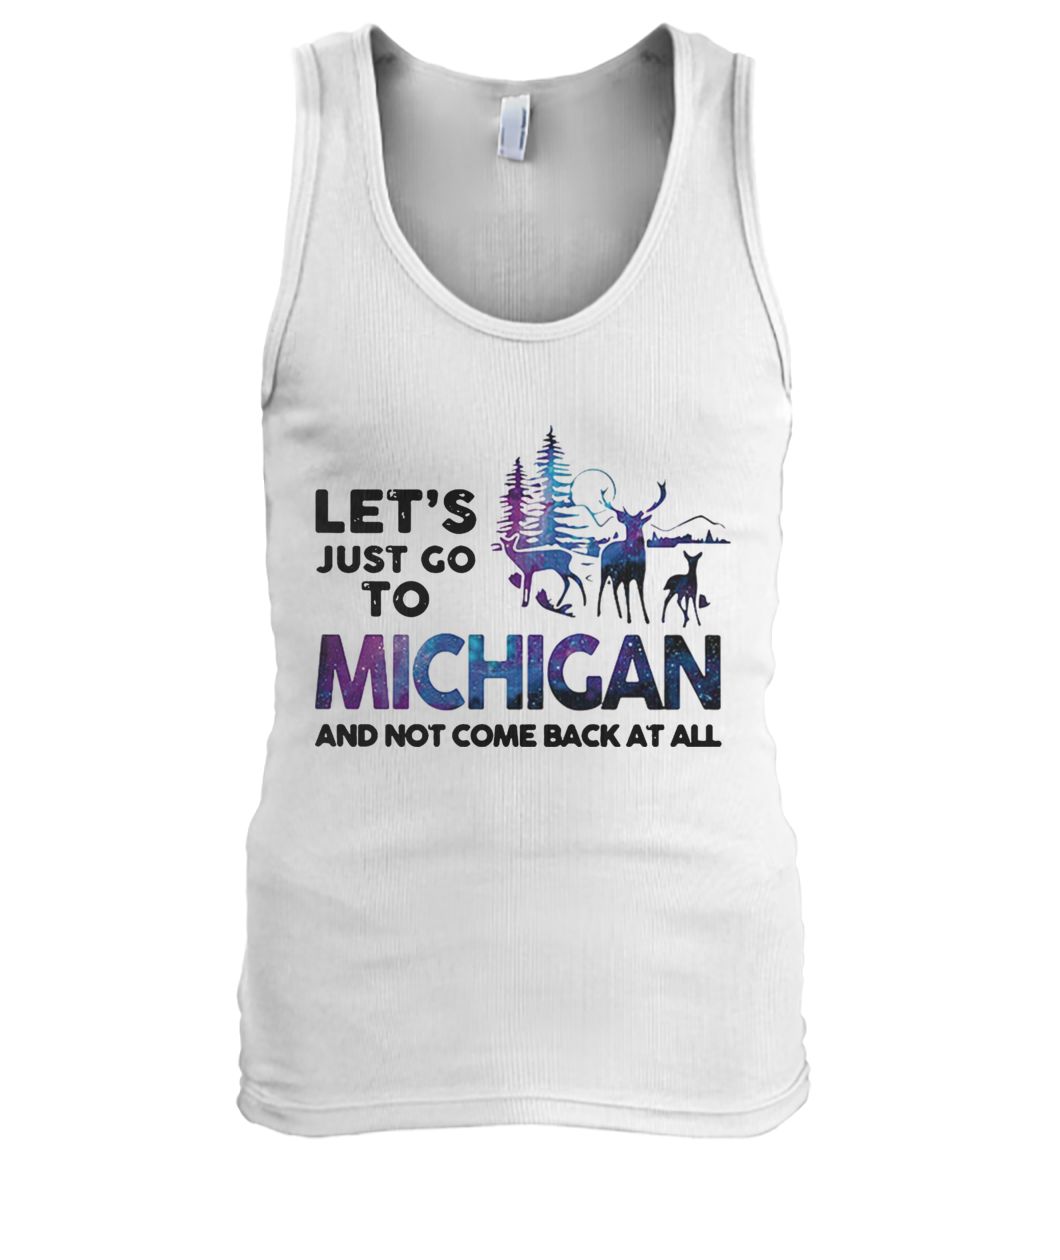 Let's just go to michigan and not come back at all men's tank top